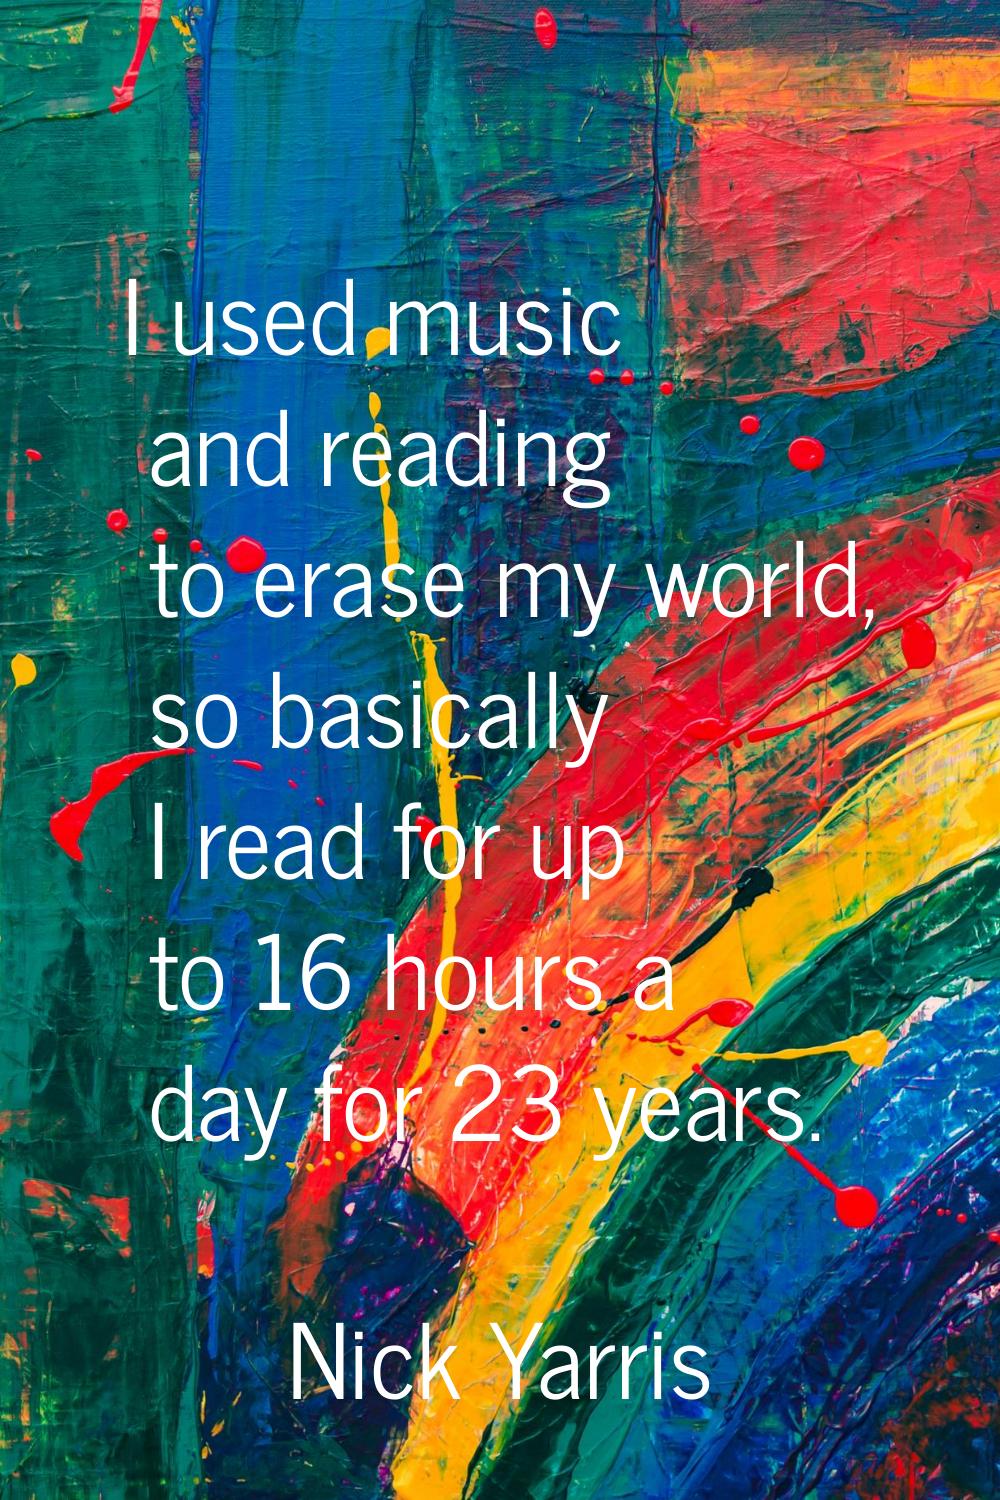 I used music and reading to erase my world, so basically I read for up to 16 hours a day for 23 yea